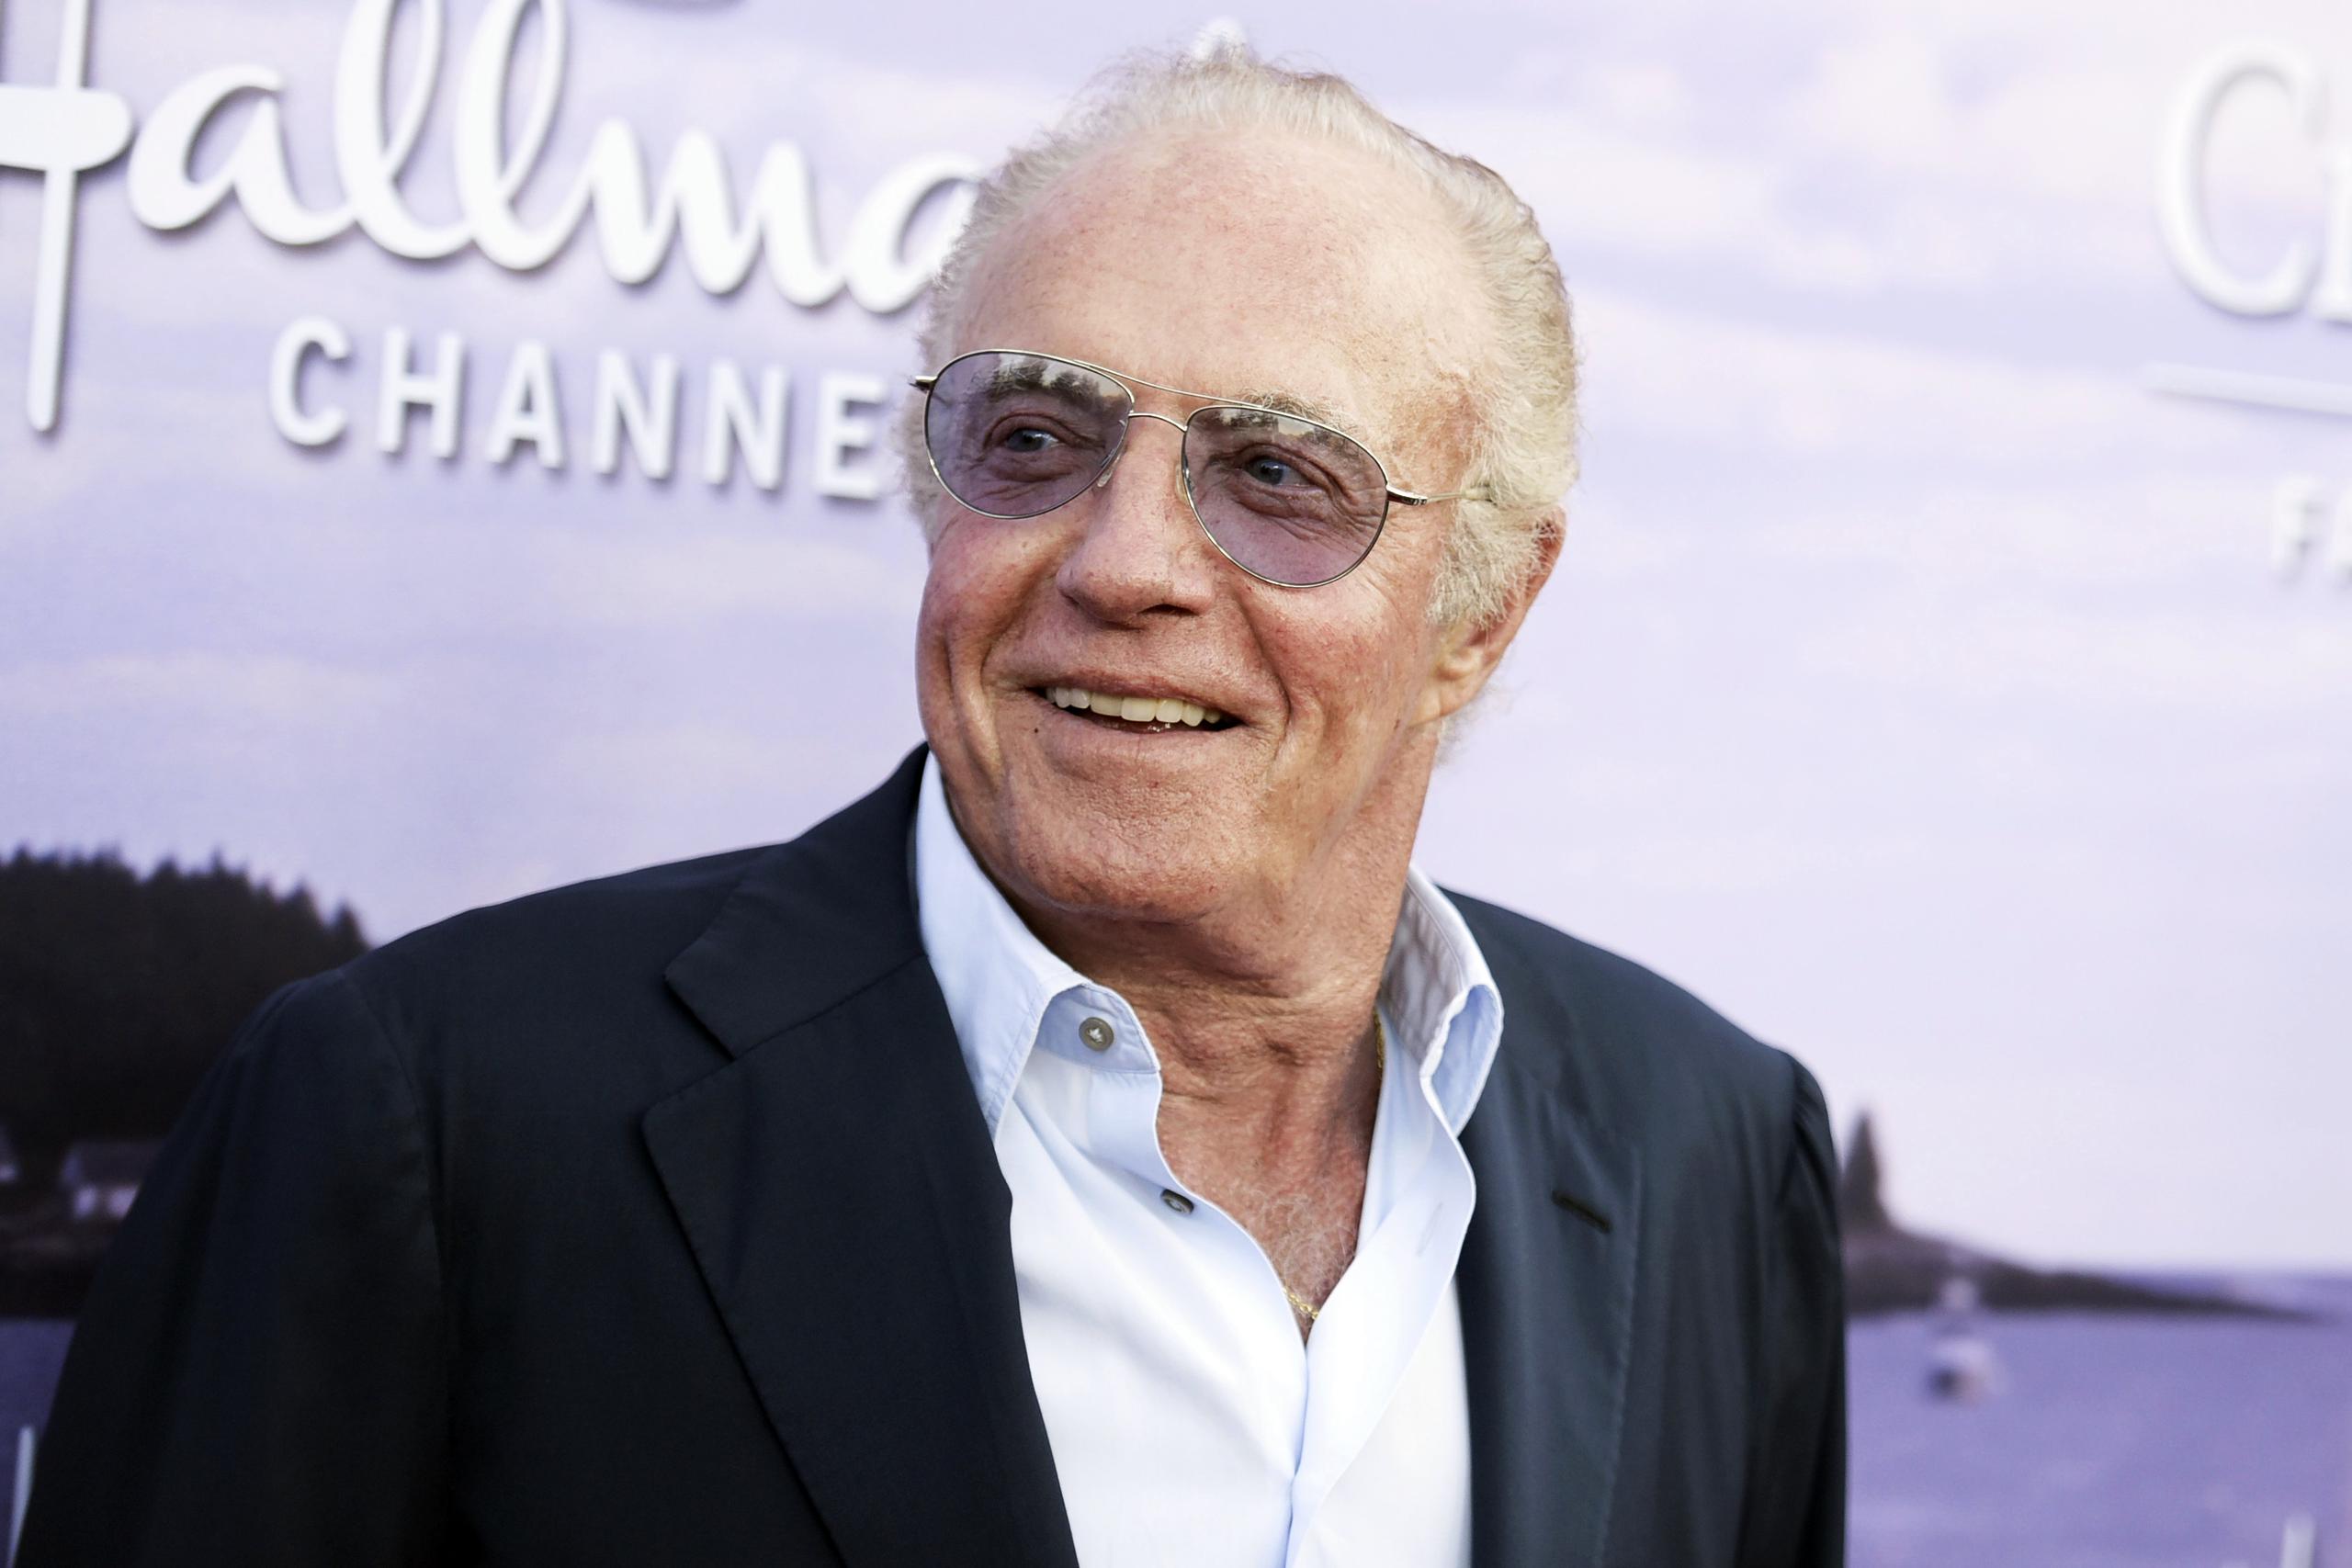 James Caan. (Photo by Richard Shotwell/Invision/AP, File)